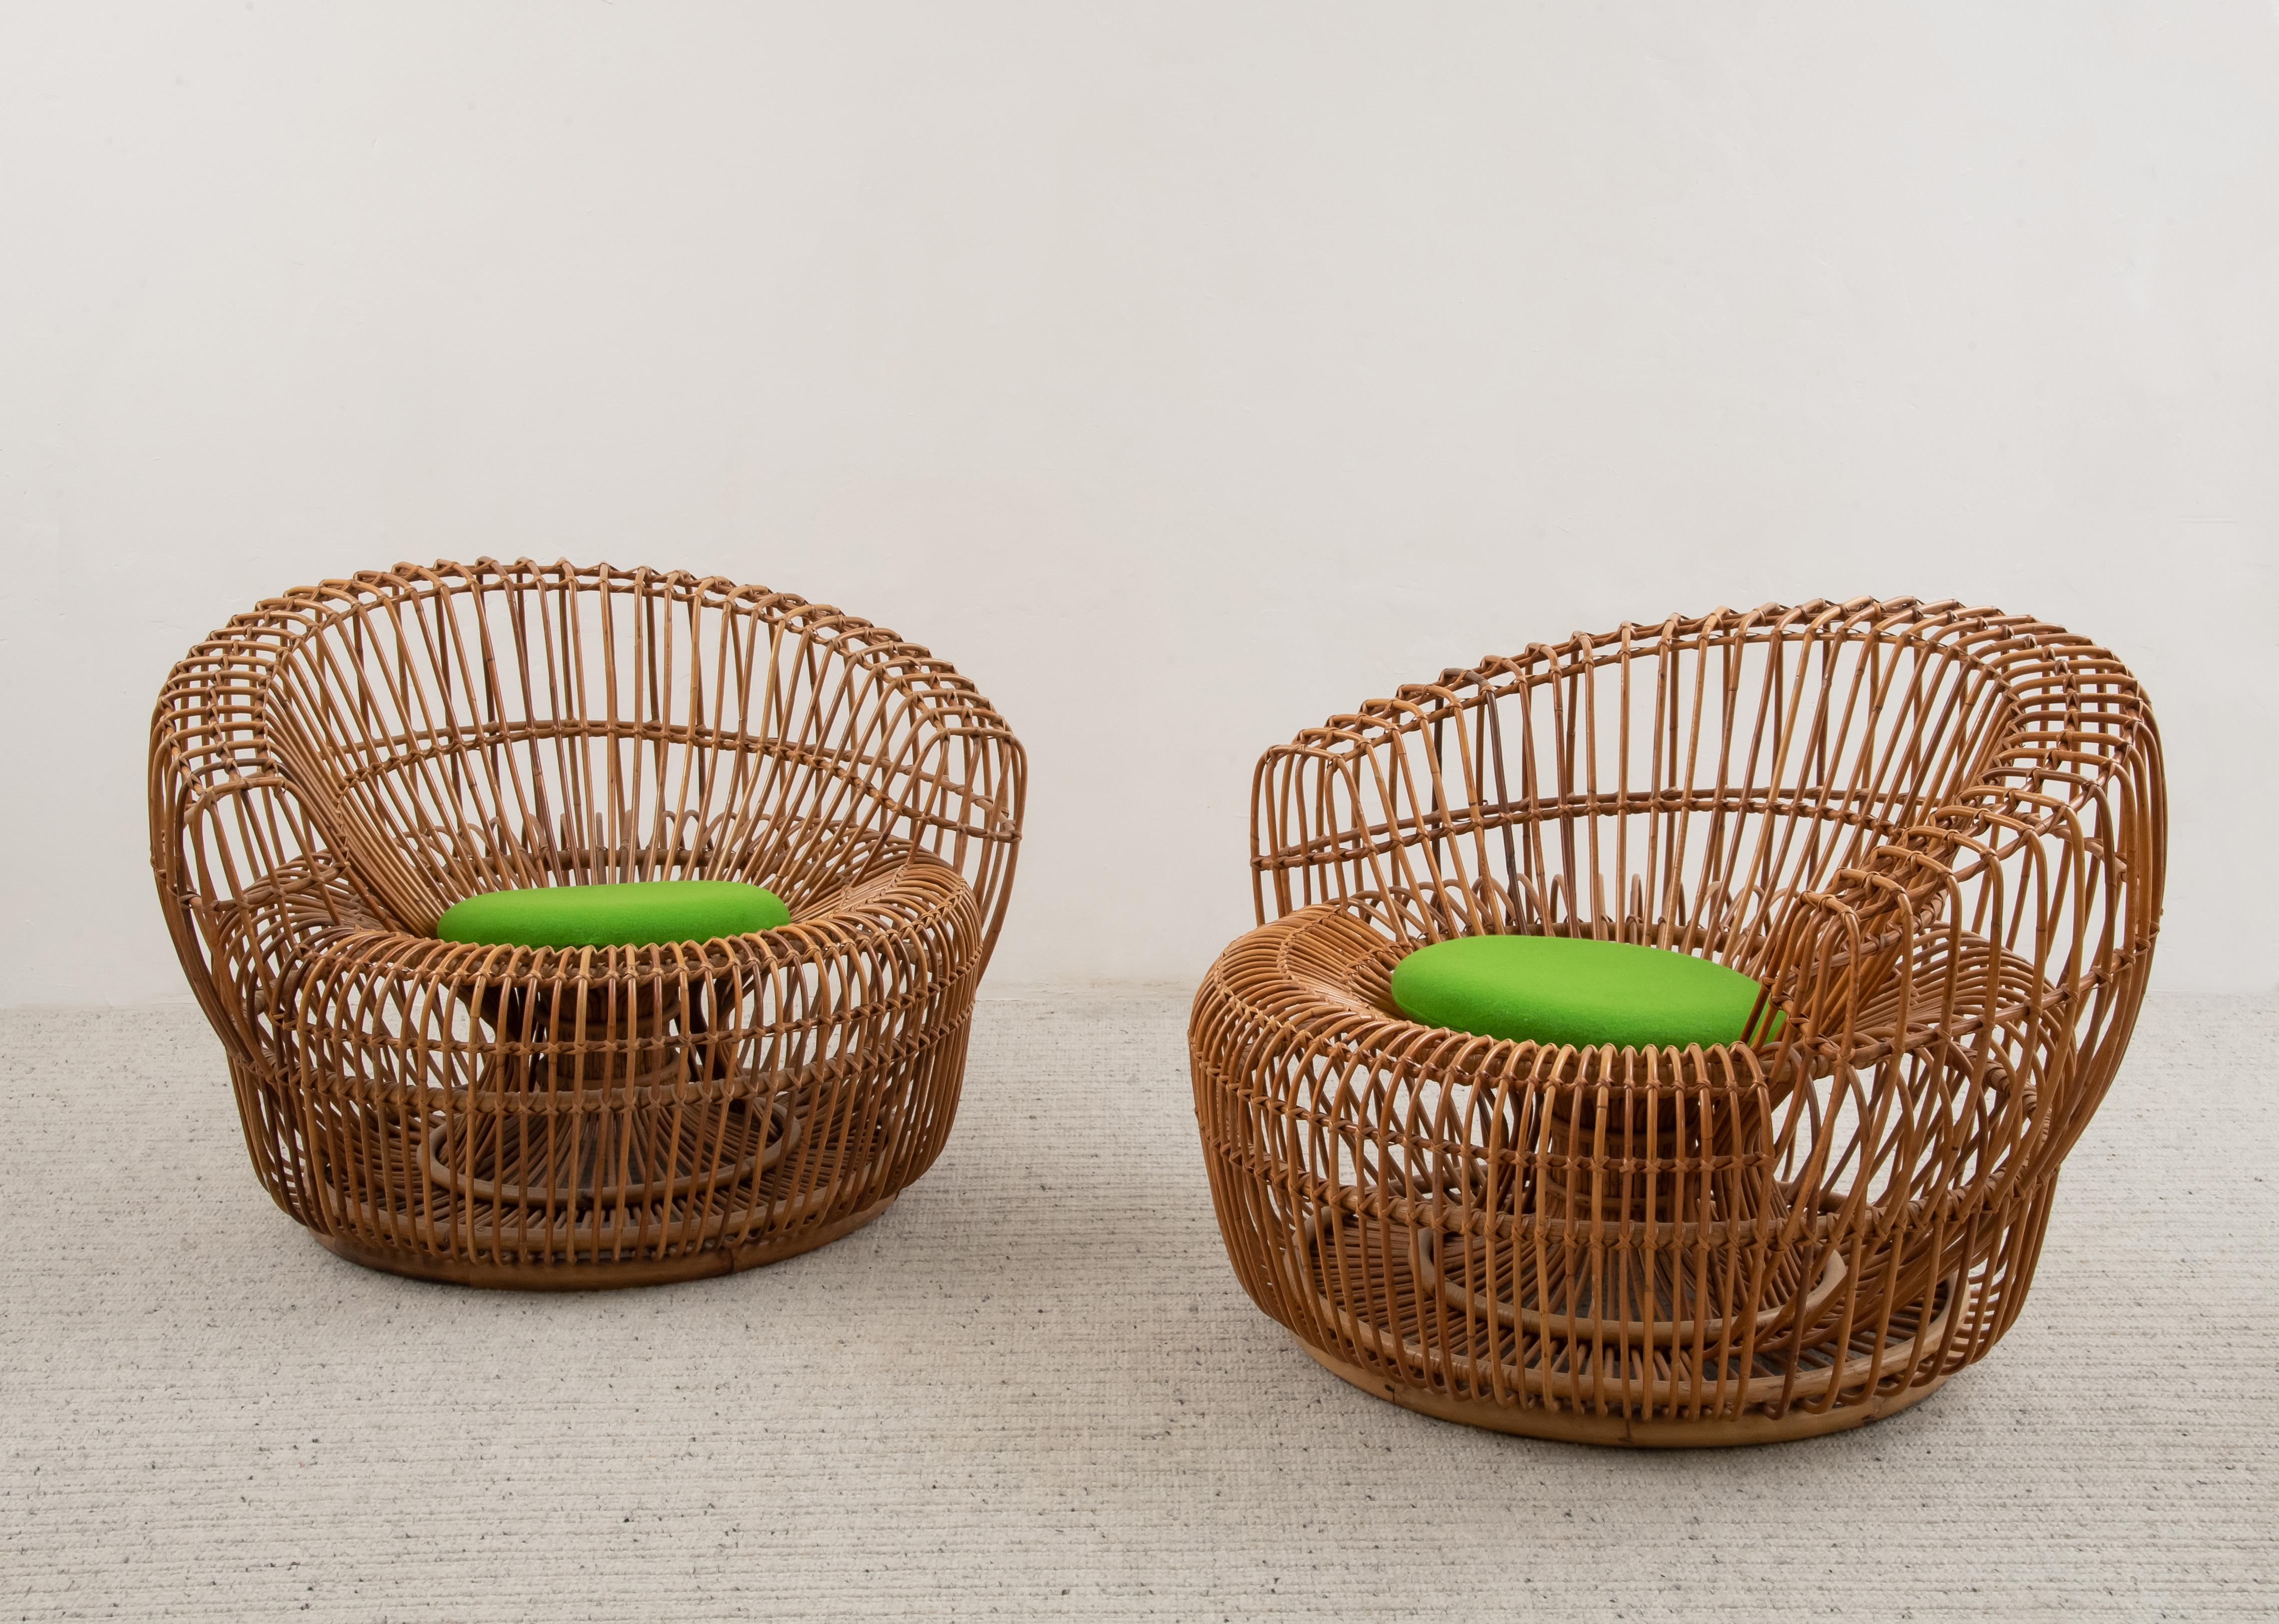 Italian design
Pair of Rattan armchairs, c.1950
Material: Hand-woven rattan
Dimension : H 70 x 100 x 93 cm
A skillful example of Italian craftsmanship, this elegant pair of rattan basket armchairs combines a modern statement and a timeless